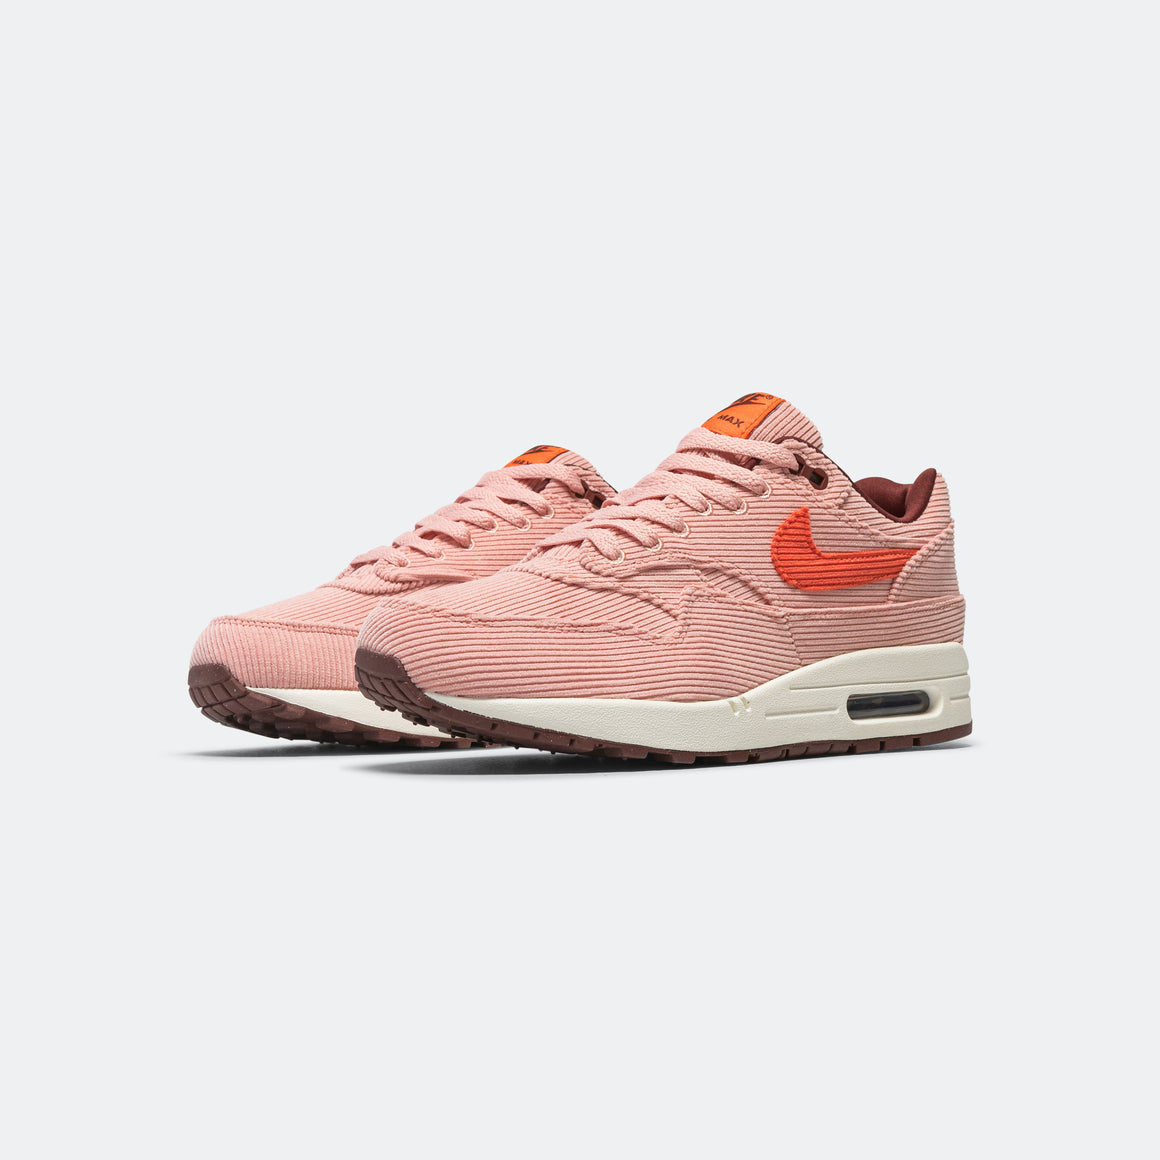 Nike - Air Max 1 PRM - Coral Starburst/Bright Coral-Oxen Brown - UP THERE